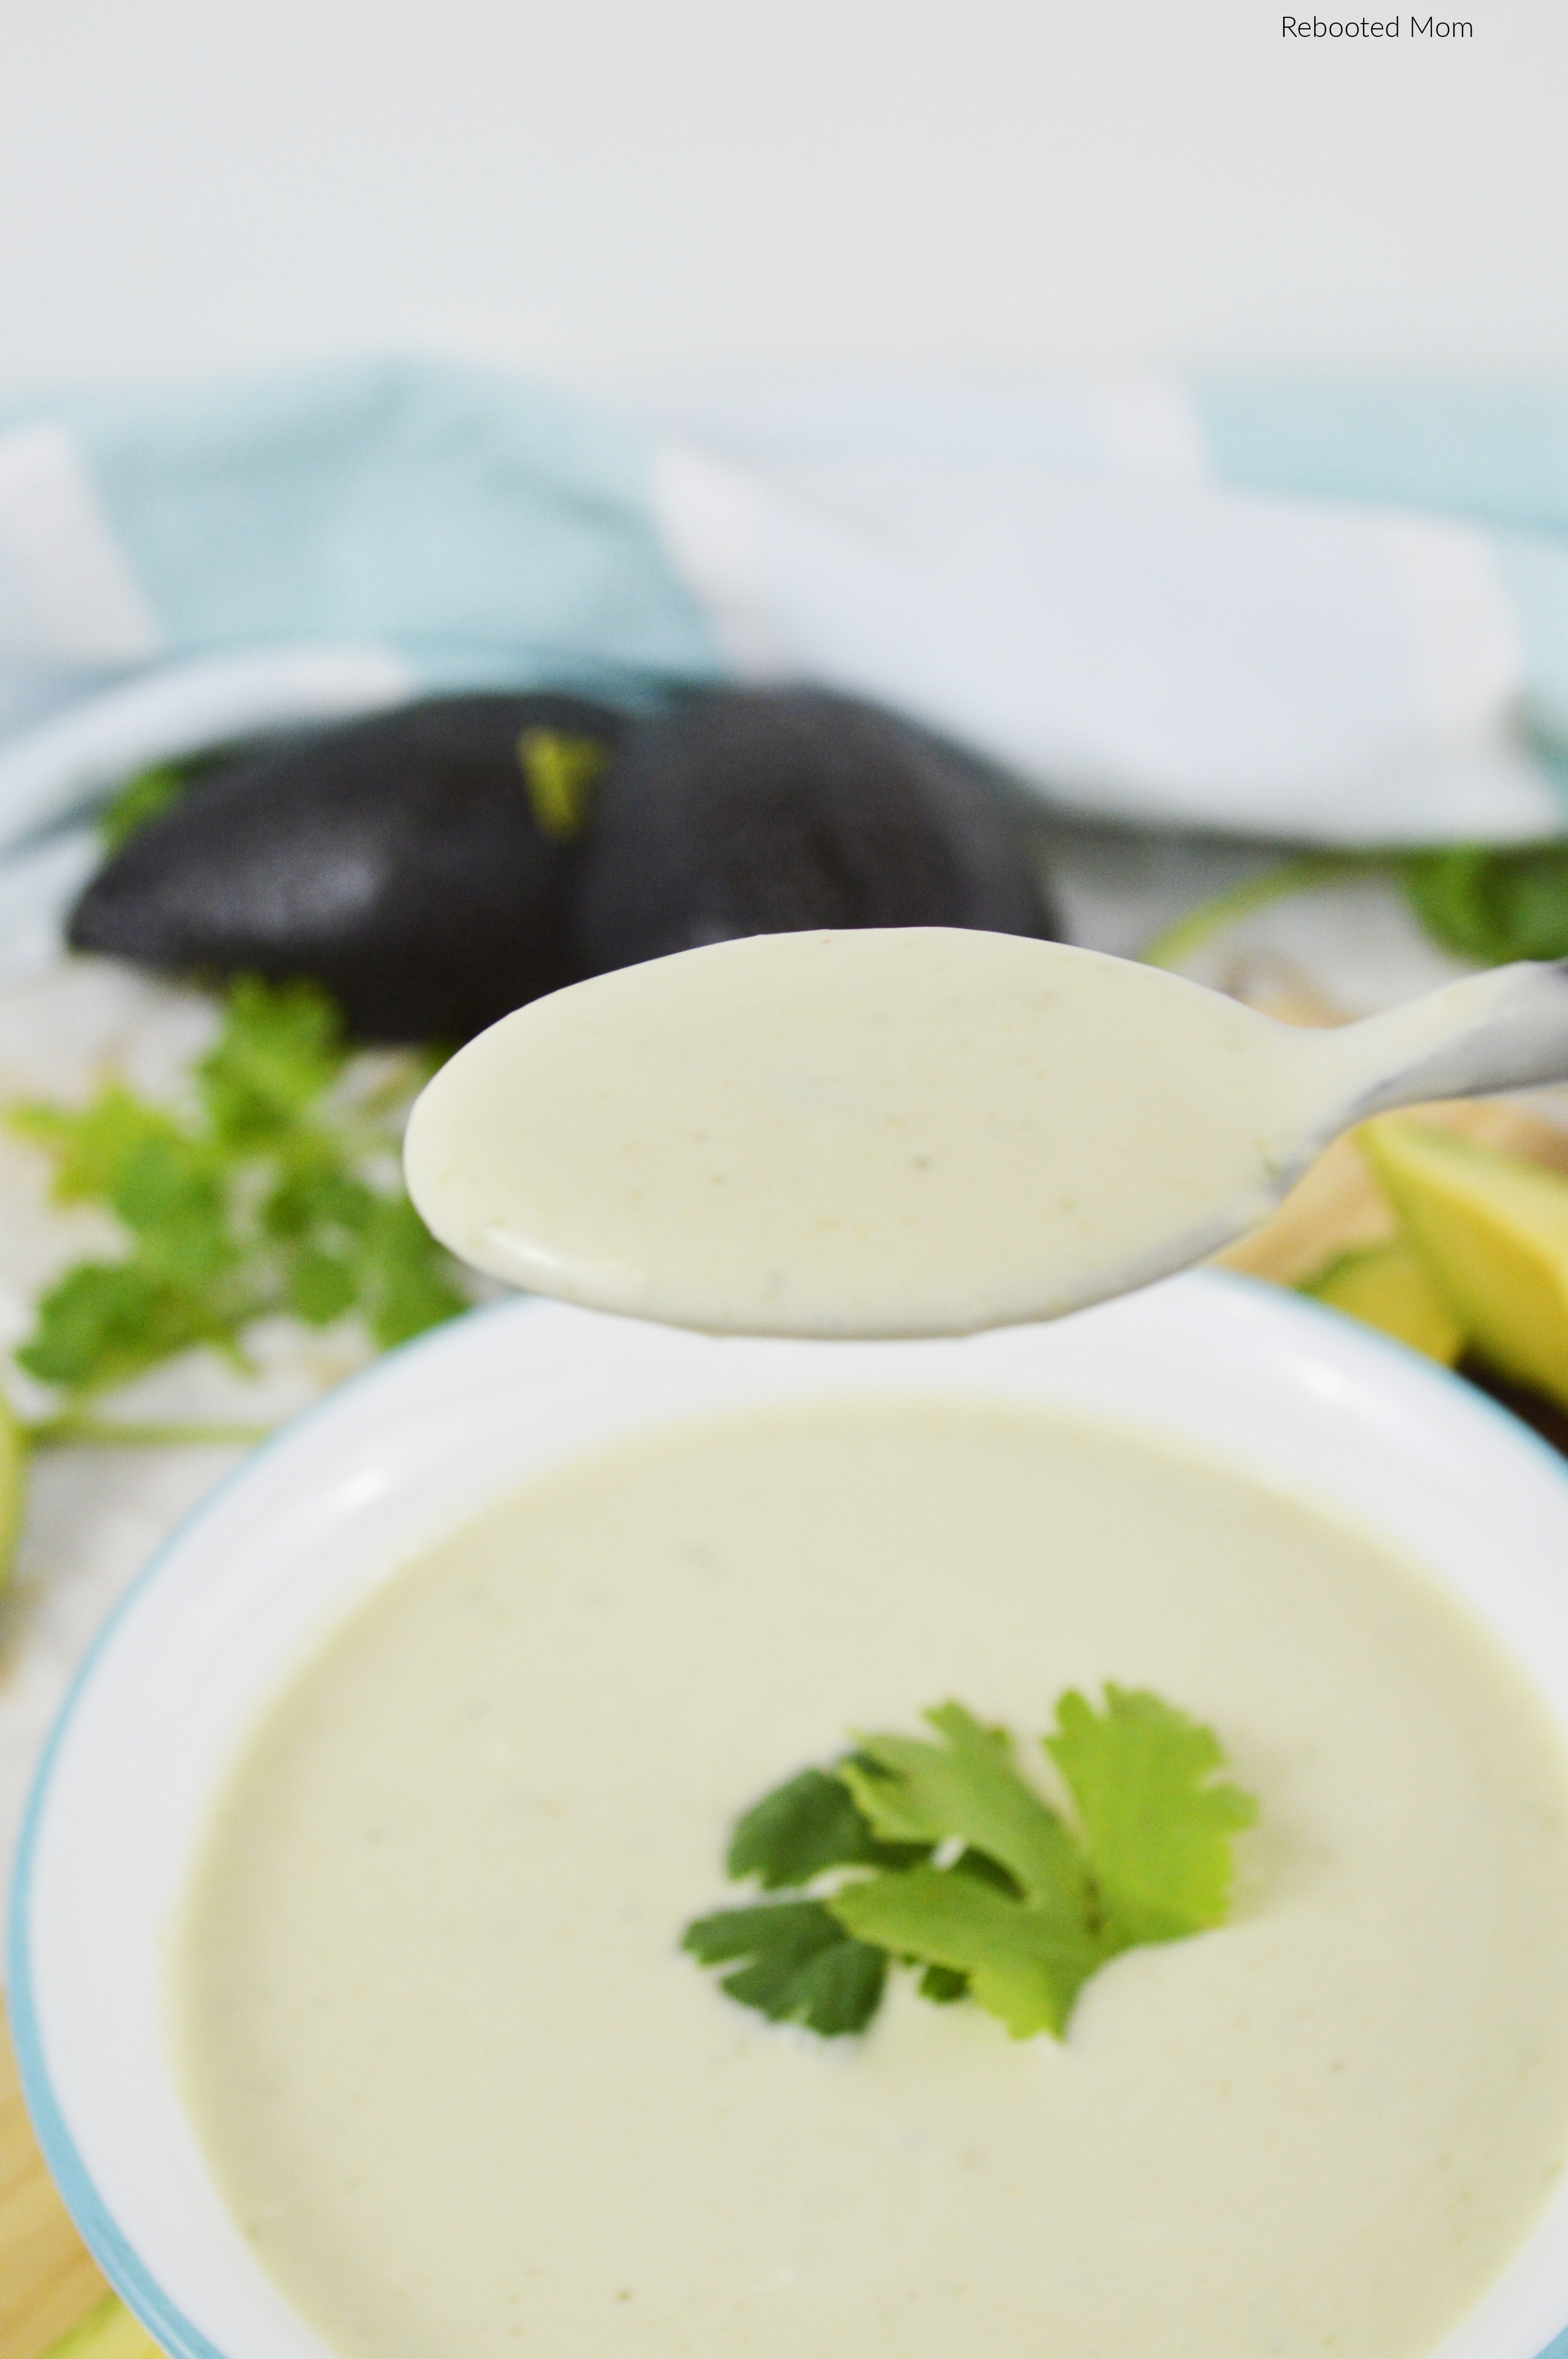 Chilled Avocado Soup